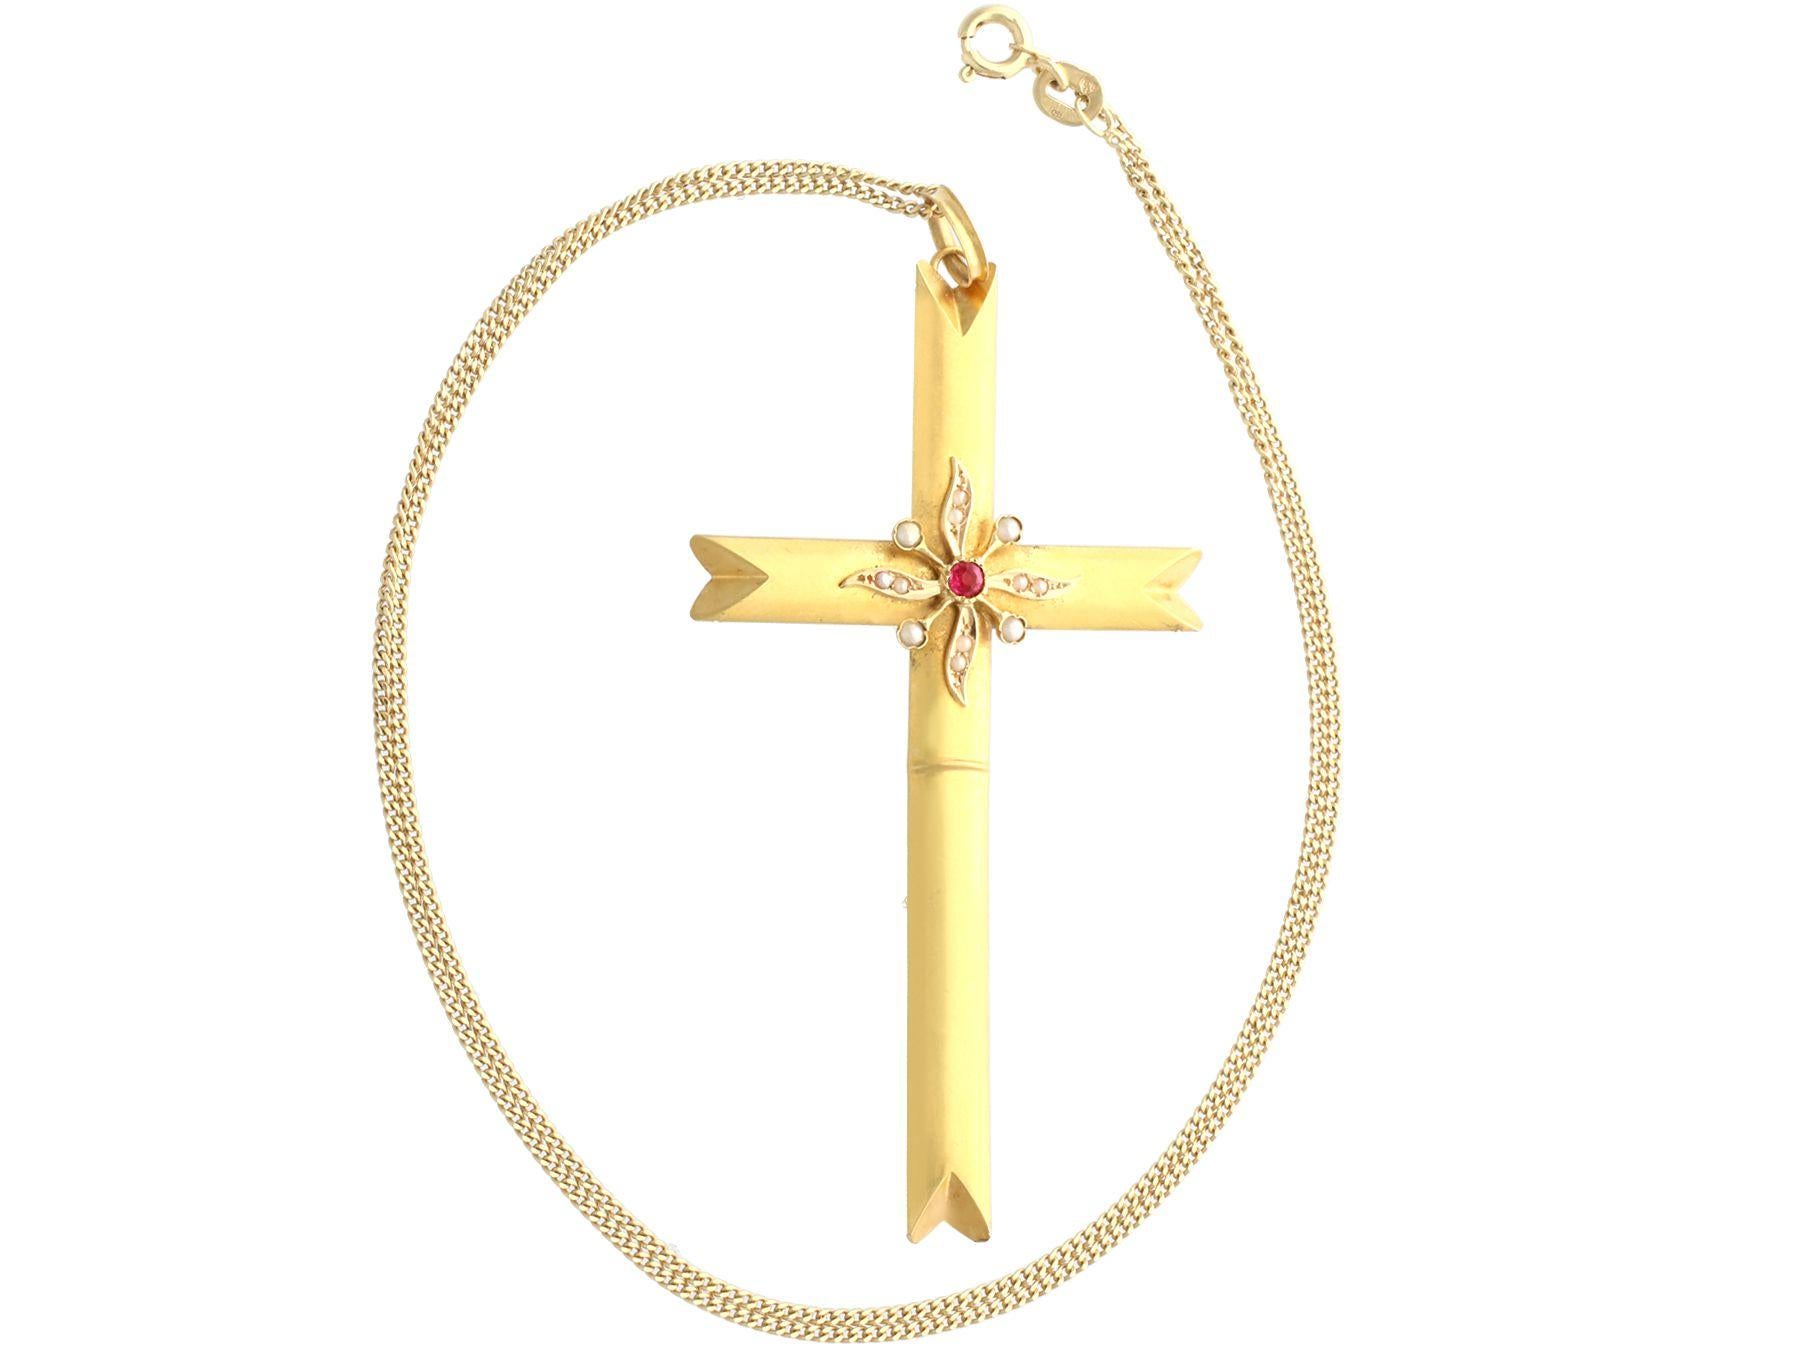 A fine and impressive antique Victorian seed pearl and imitation gemstone, 18k yellow gold cross pendant; part of our diverse antique jewelry and estate jewelry collections.

This fine and impressive antique pendant has been crafted in 18k yellow